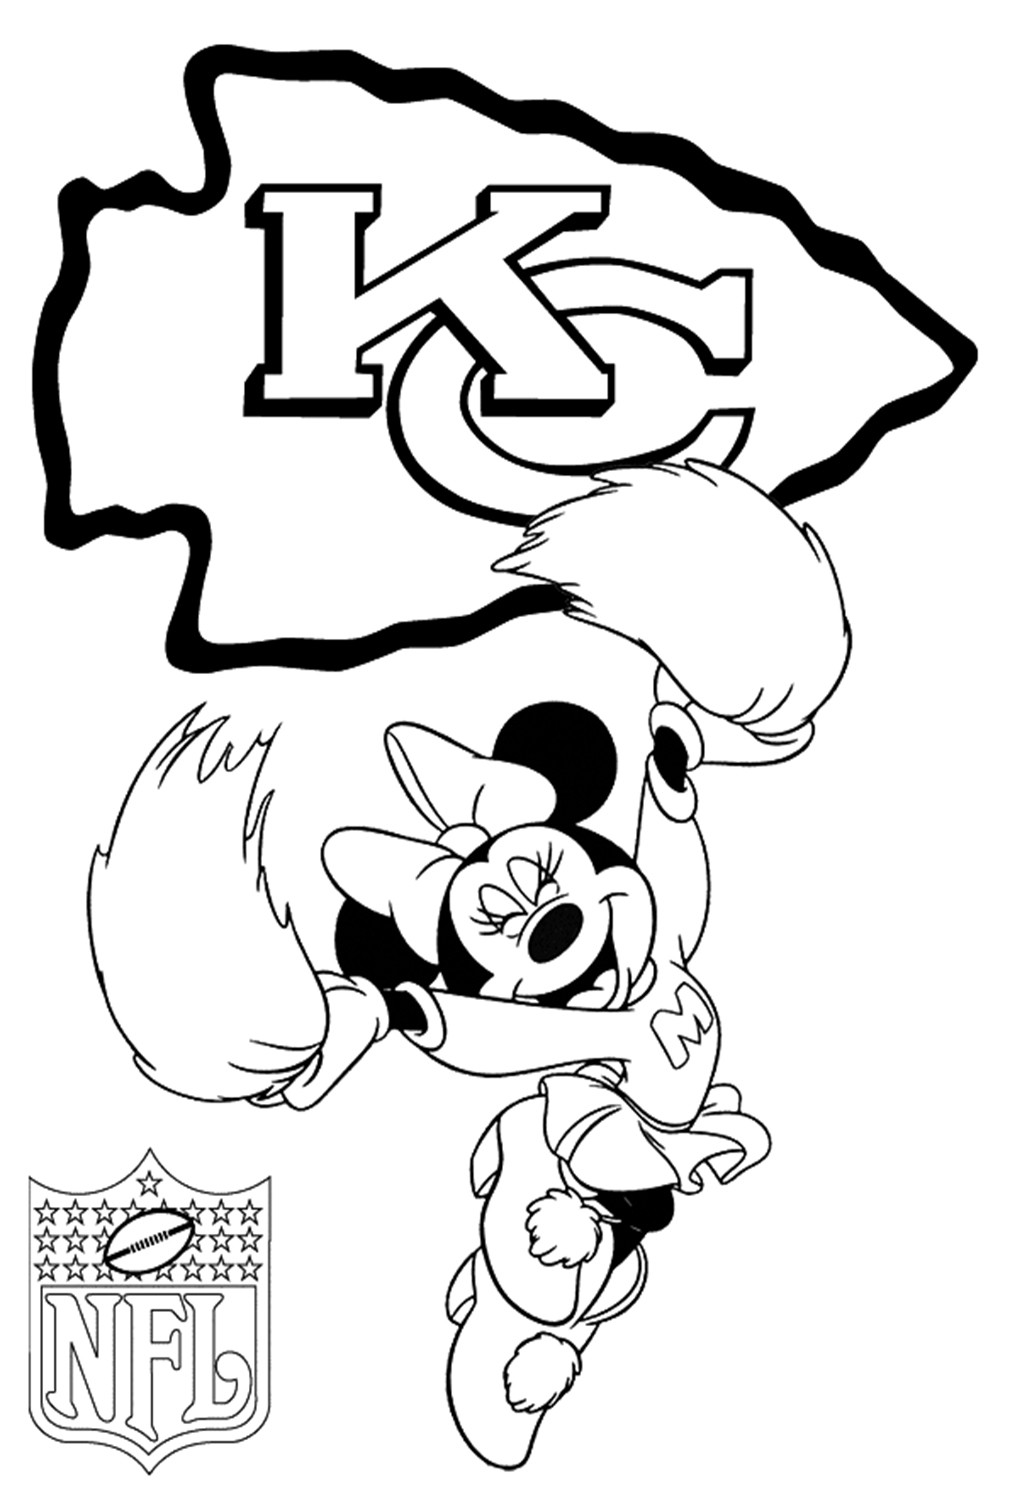 Kansas City Chiefs With Minnie Mouse Coloring Page